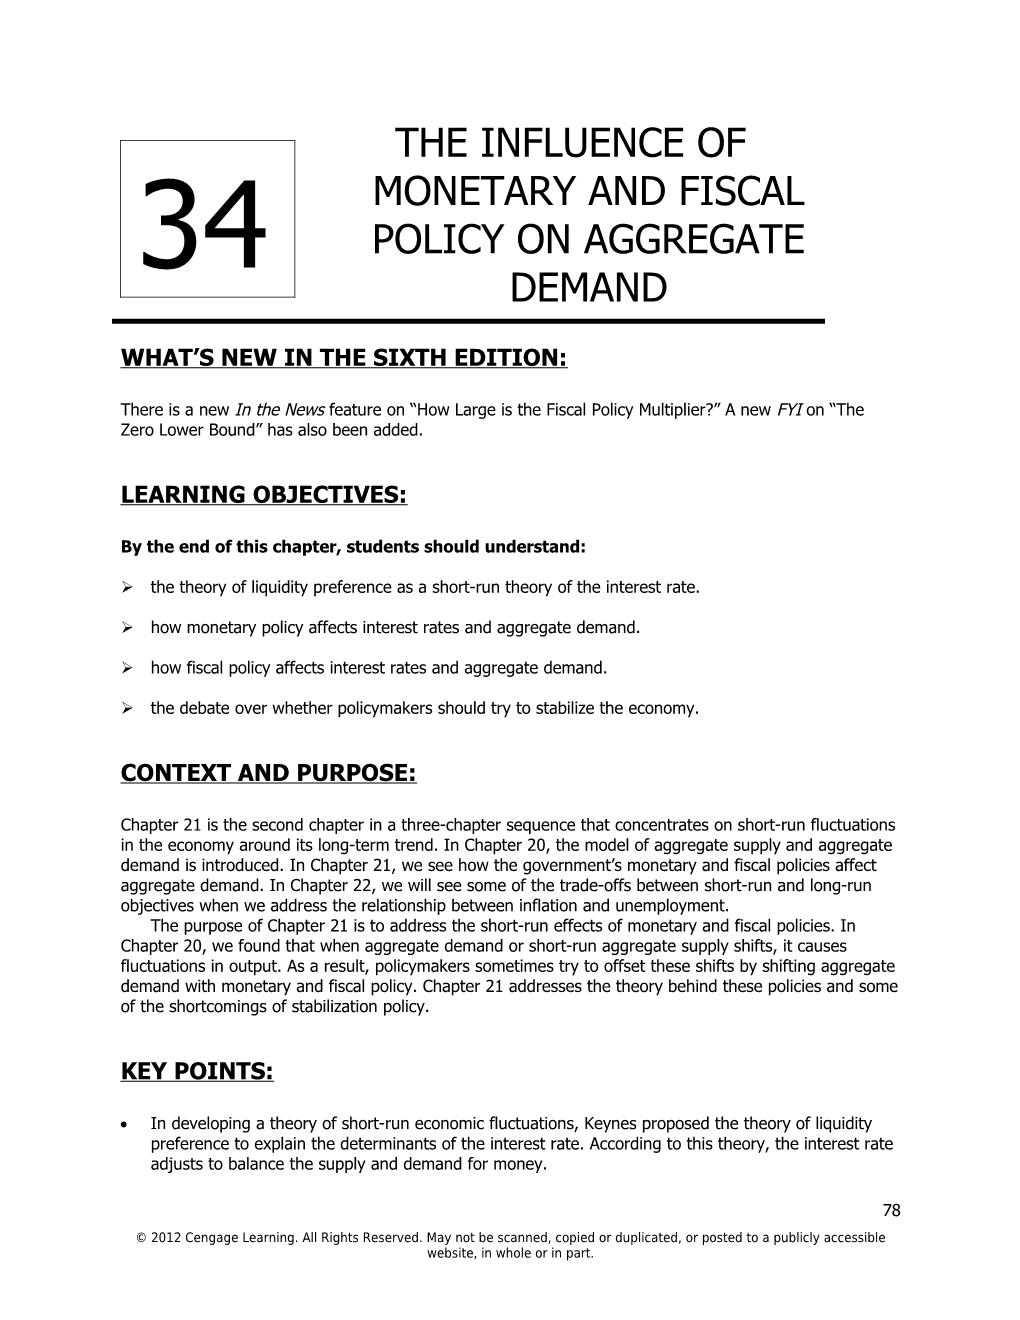 Chapter 34/The Influence of Monetary and Fiscal Policy on Aggregate Demand 1